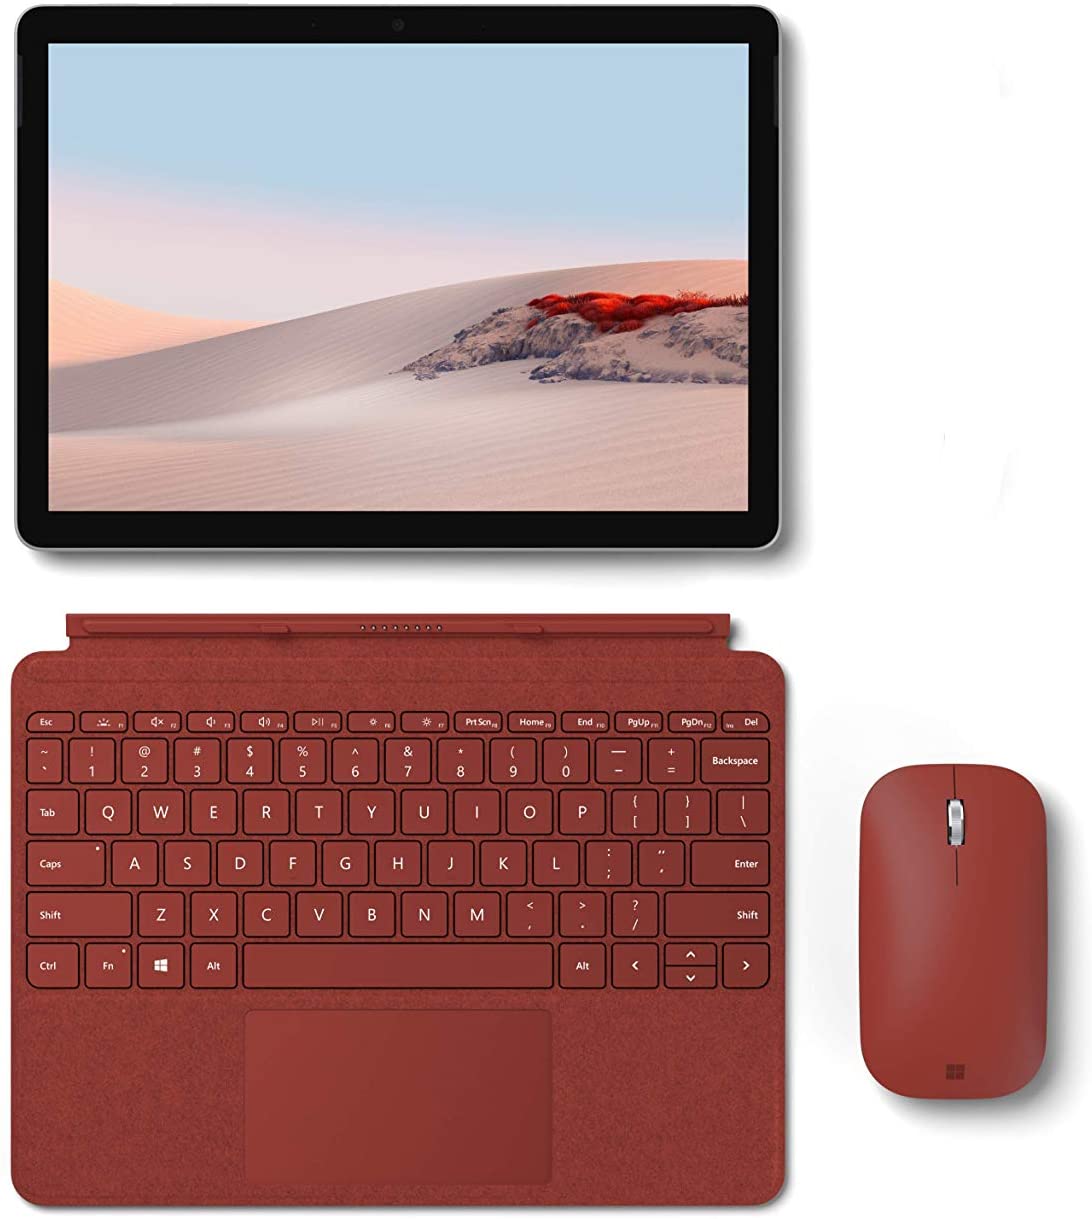 Microsoft Surface Go 2 - Pentium Gold 4425Y · Intel HD Graphics 615 ·  10.5", Full HD (1920 x 1280), IPS · 64GB eMMC · 4GB LPDDR3 · Windows 10  Home · with Red Type Cover · Surface Mobile Mouse (Red) | LaptopMedia.com